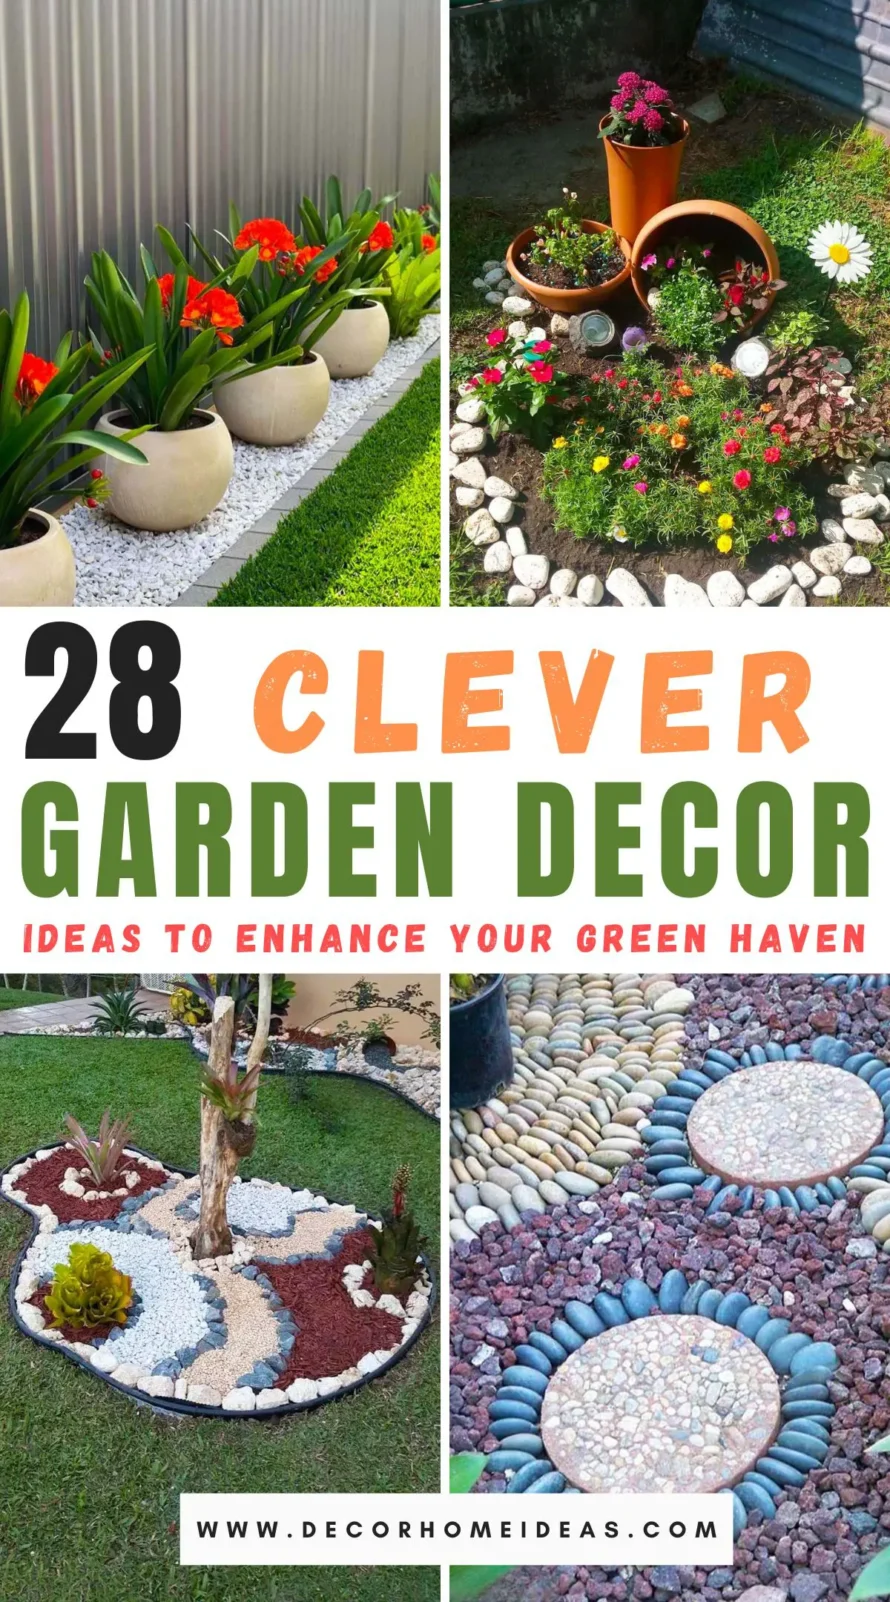 Explore 28 clever garden decorations that will elevate your outdoor sanctuary. From whimsical sculptures to functional accents, each idea is designed to enhance the beauty and charm of your green space. Get ready to transform your garden into an enchanting haven!